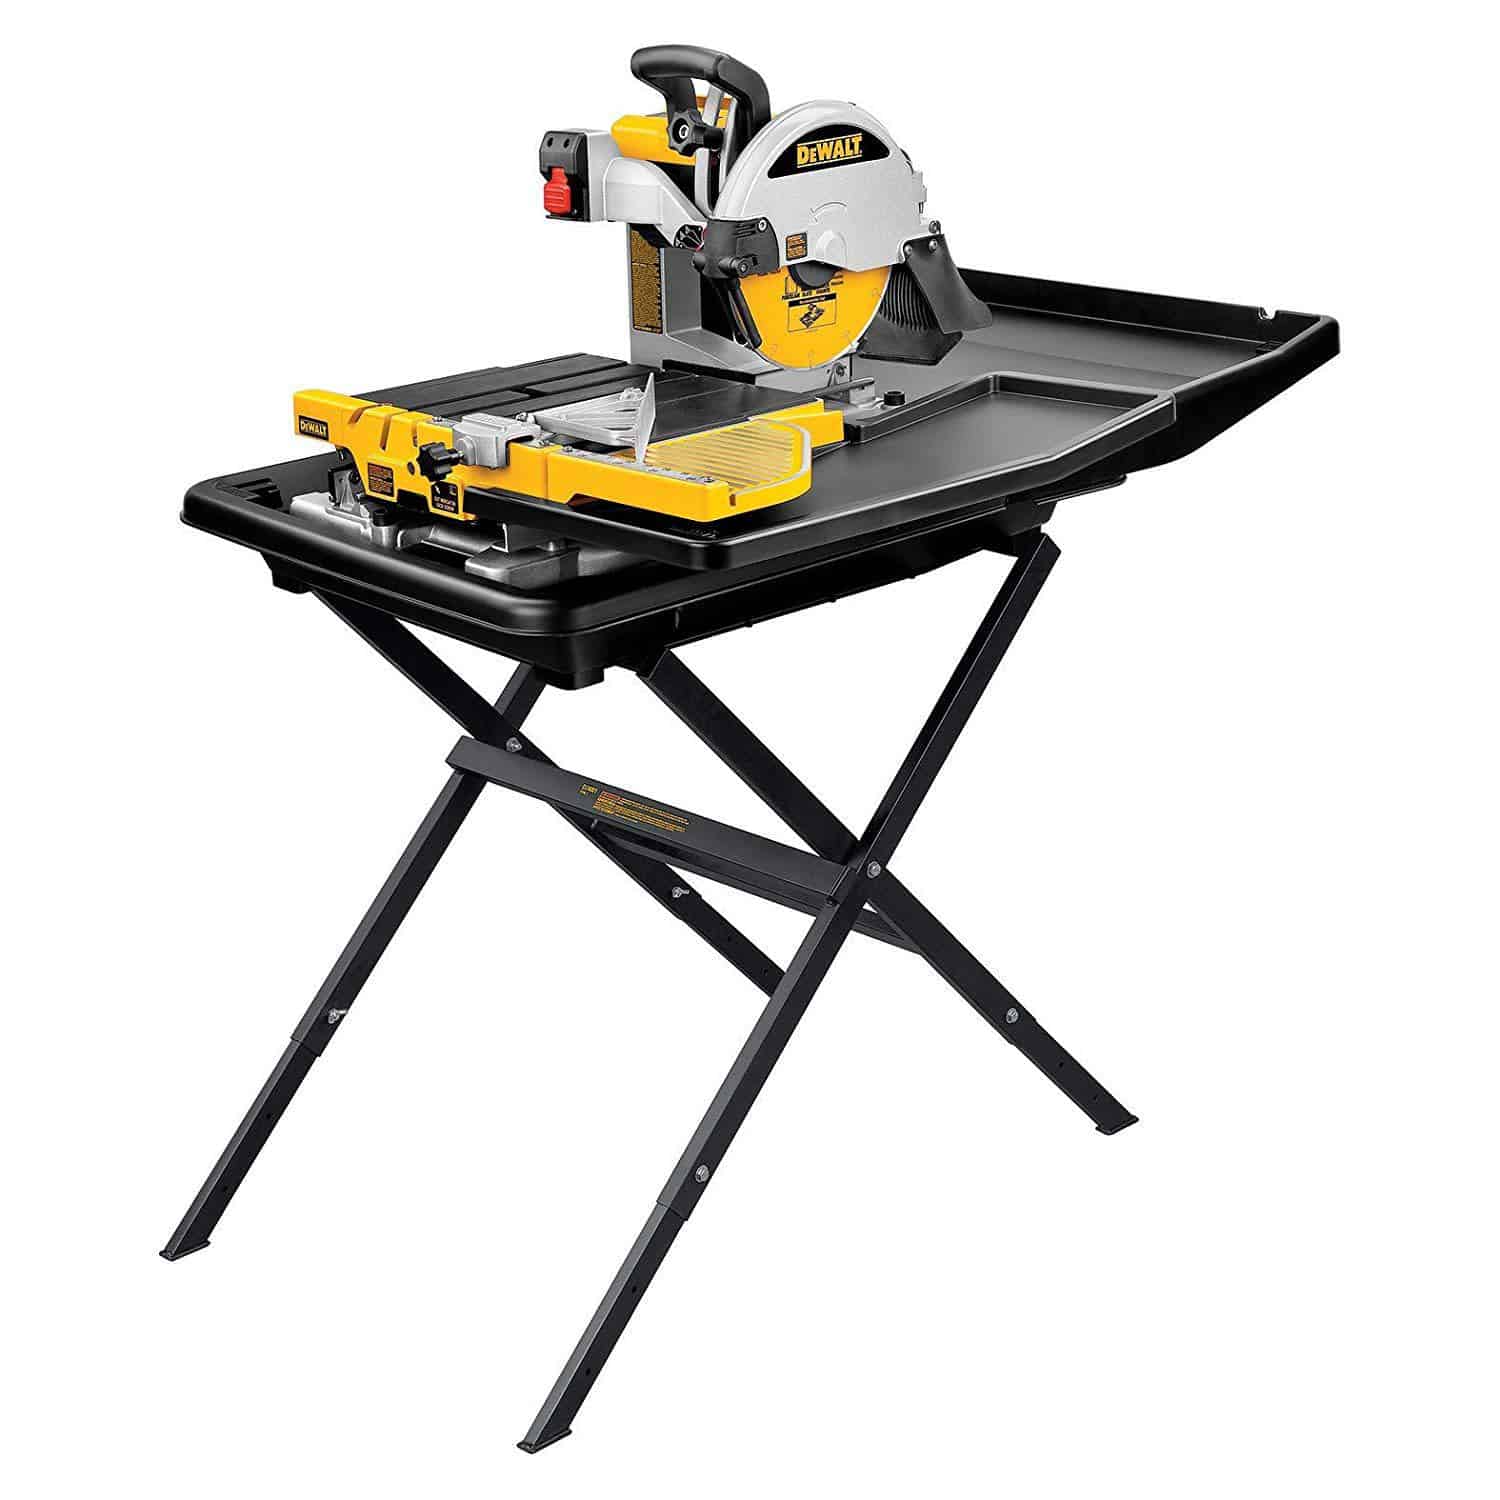 7 Best Tile Saws for Professionals and Homeowners